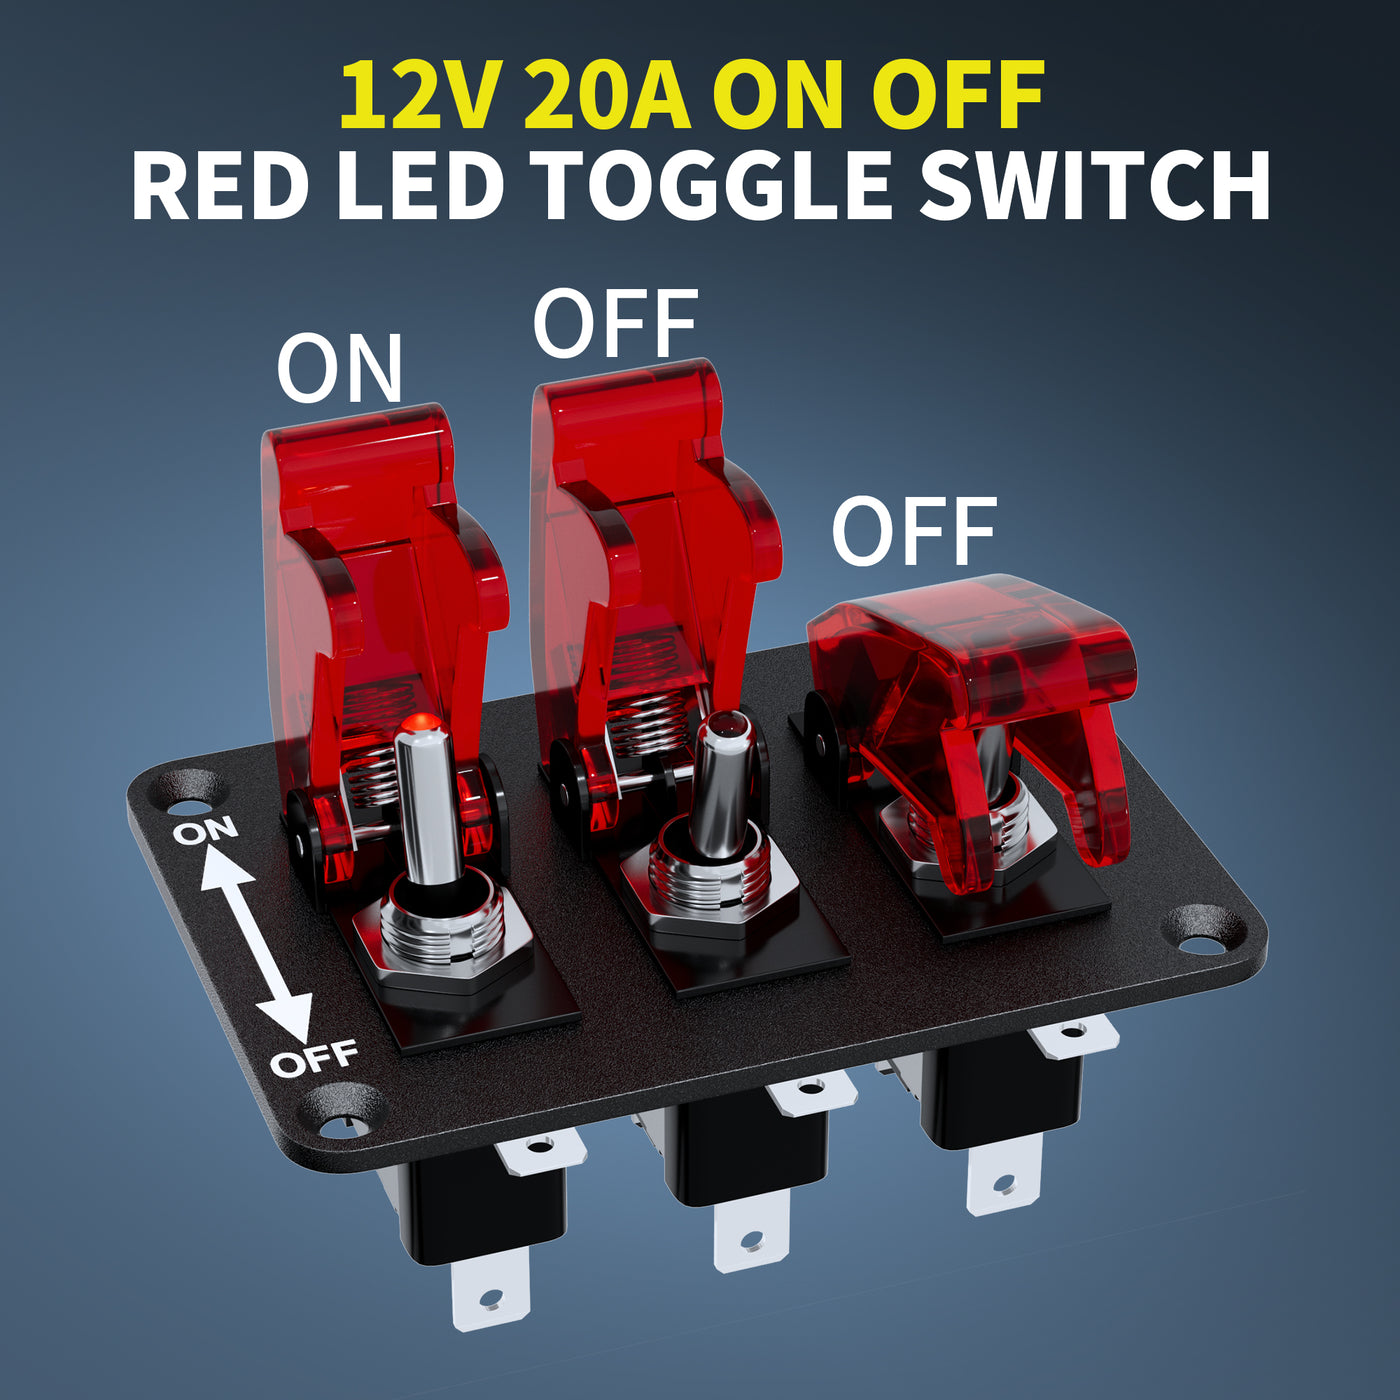 3 in 1 Ignition ON-OFF Toggle Switch Panel with LED Light and Cover - DAIER